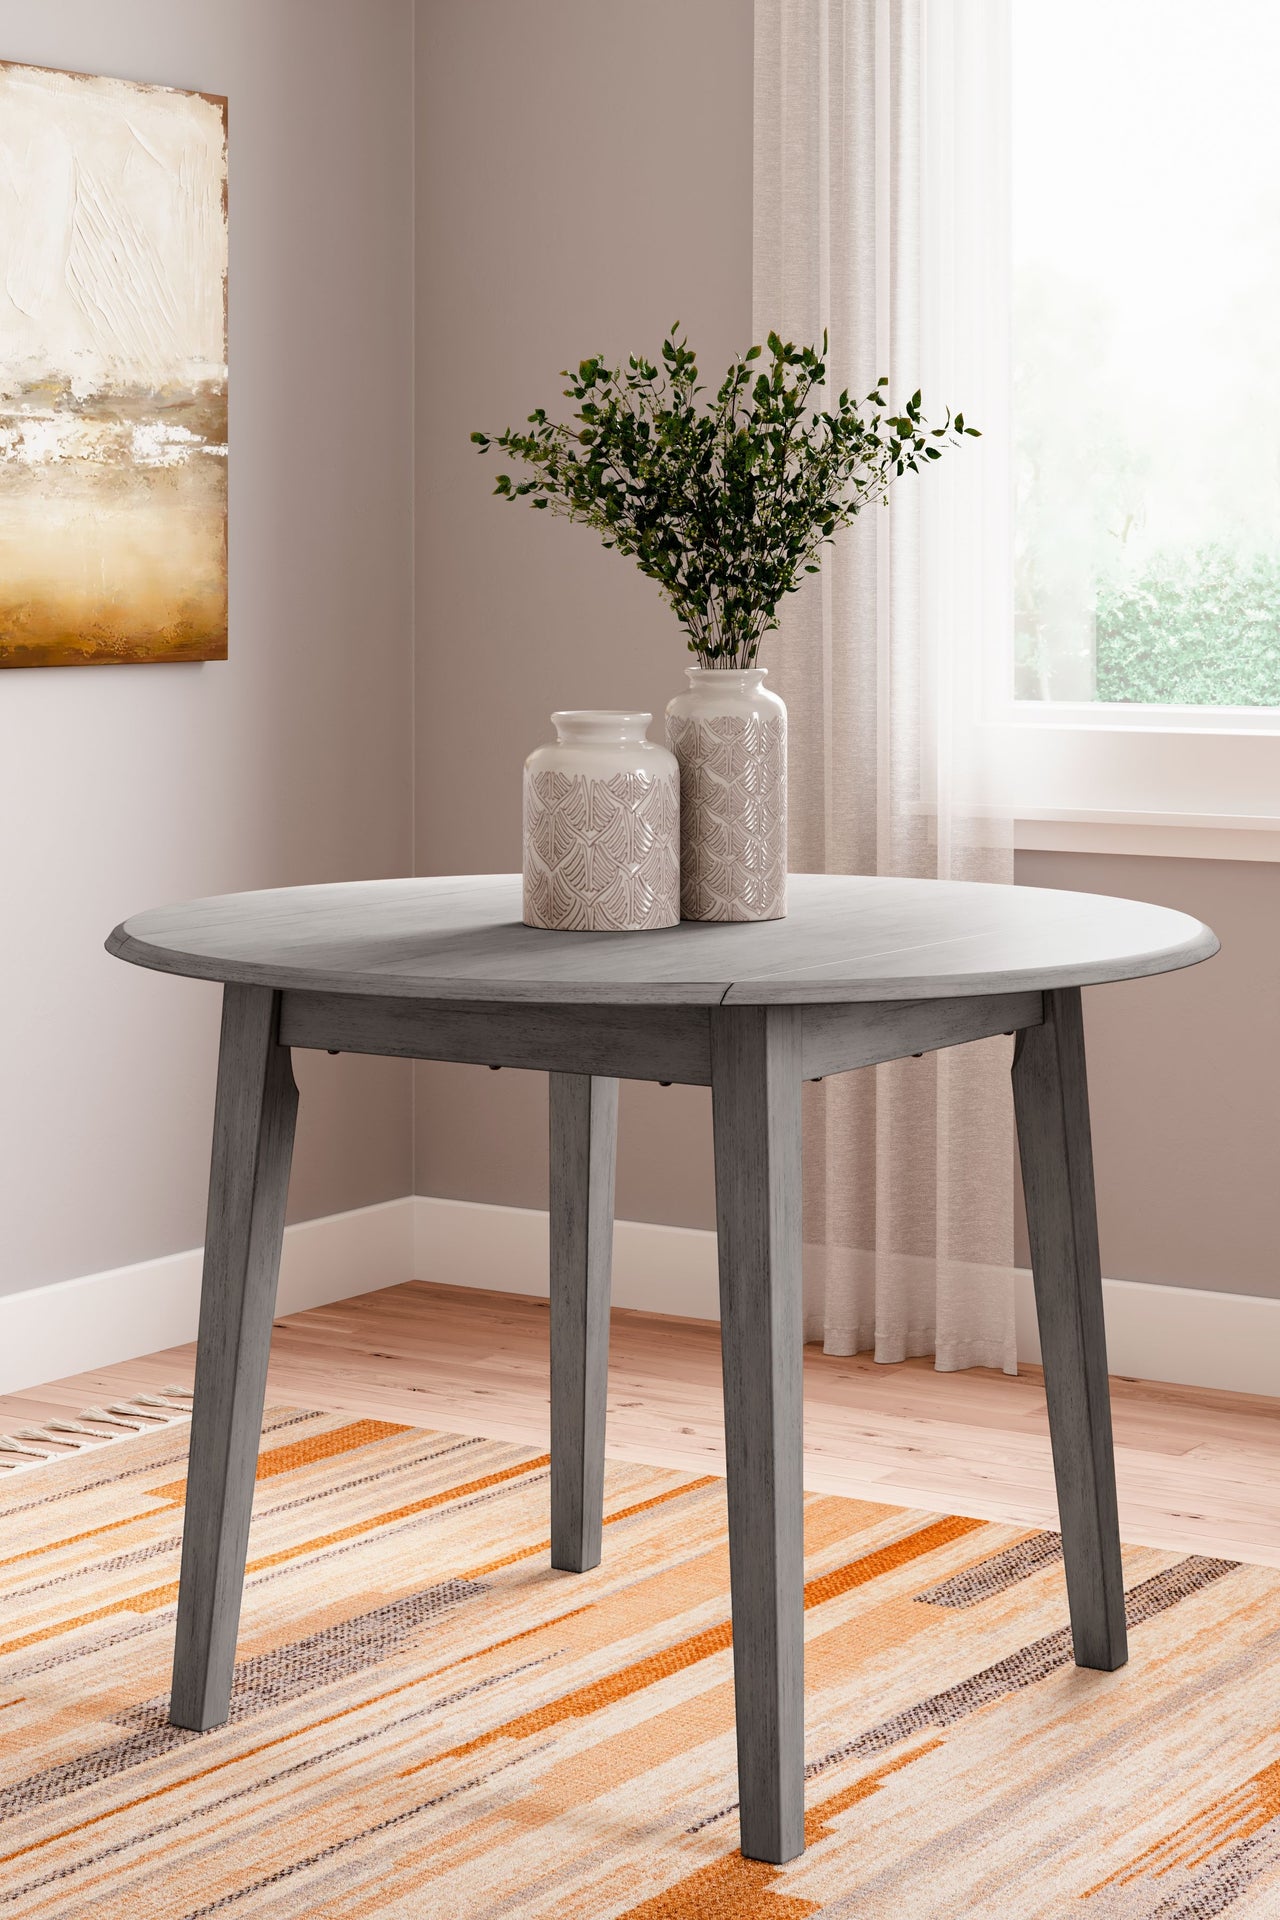 Shullden - Gray - 5 Pc. - Drop Leaf Table, 4 Side Chairs - Tony's Home Furnishings